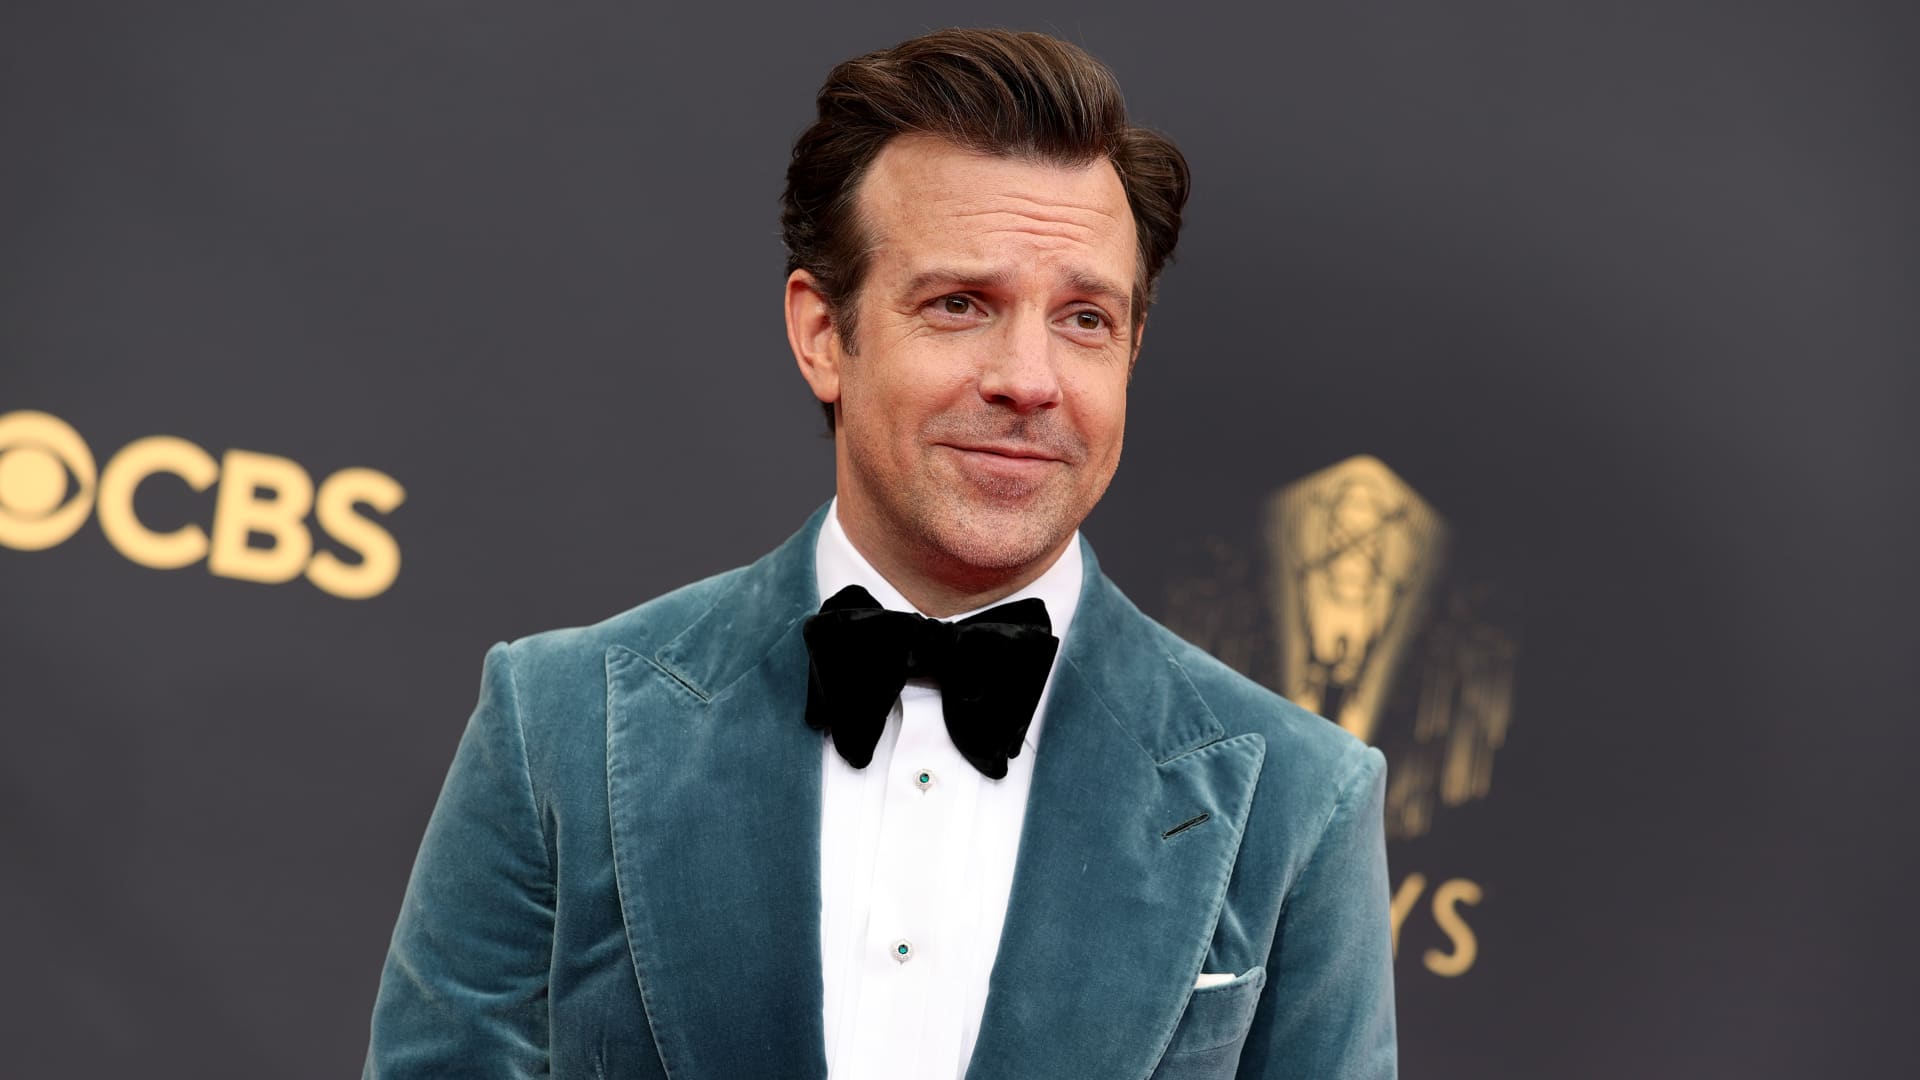 Jason Sudeikis attends the 73rd Primetime Emmy Awards at L.A. LIVE on September 19, 2021 in Los Angeles, California.